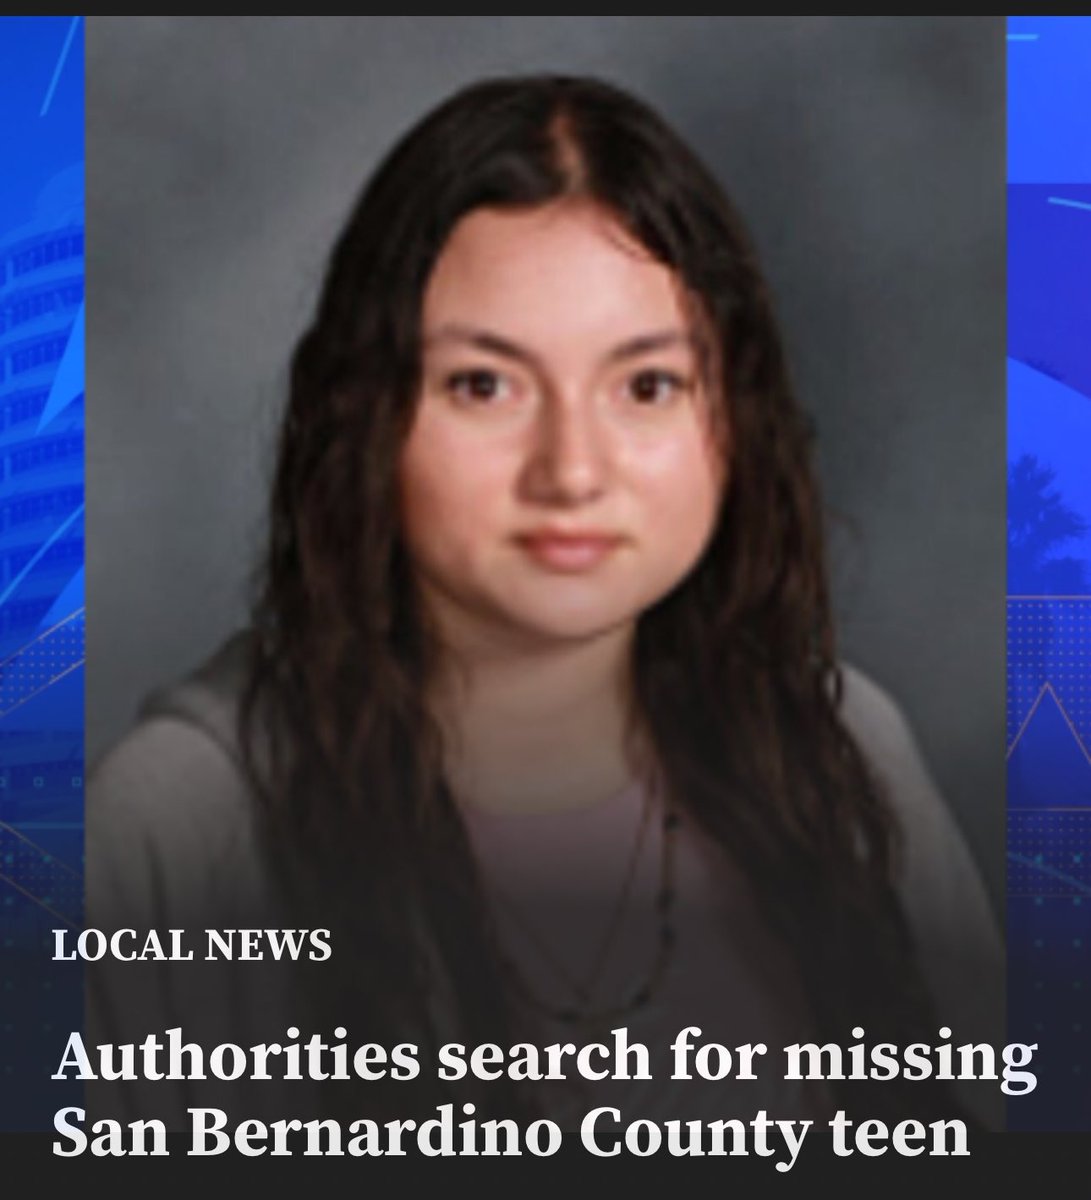 A missing Victor Valley teen was last seen leaving school on Friday morning. The critically missing girl has been identified as Evelyn V. Castaneda, 15, from Helendale, according to the San Bernardino County Sheriff’s Department. ktla.com/news/local-new…